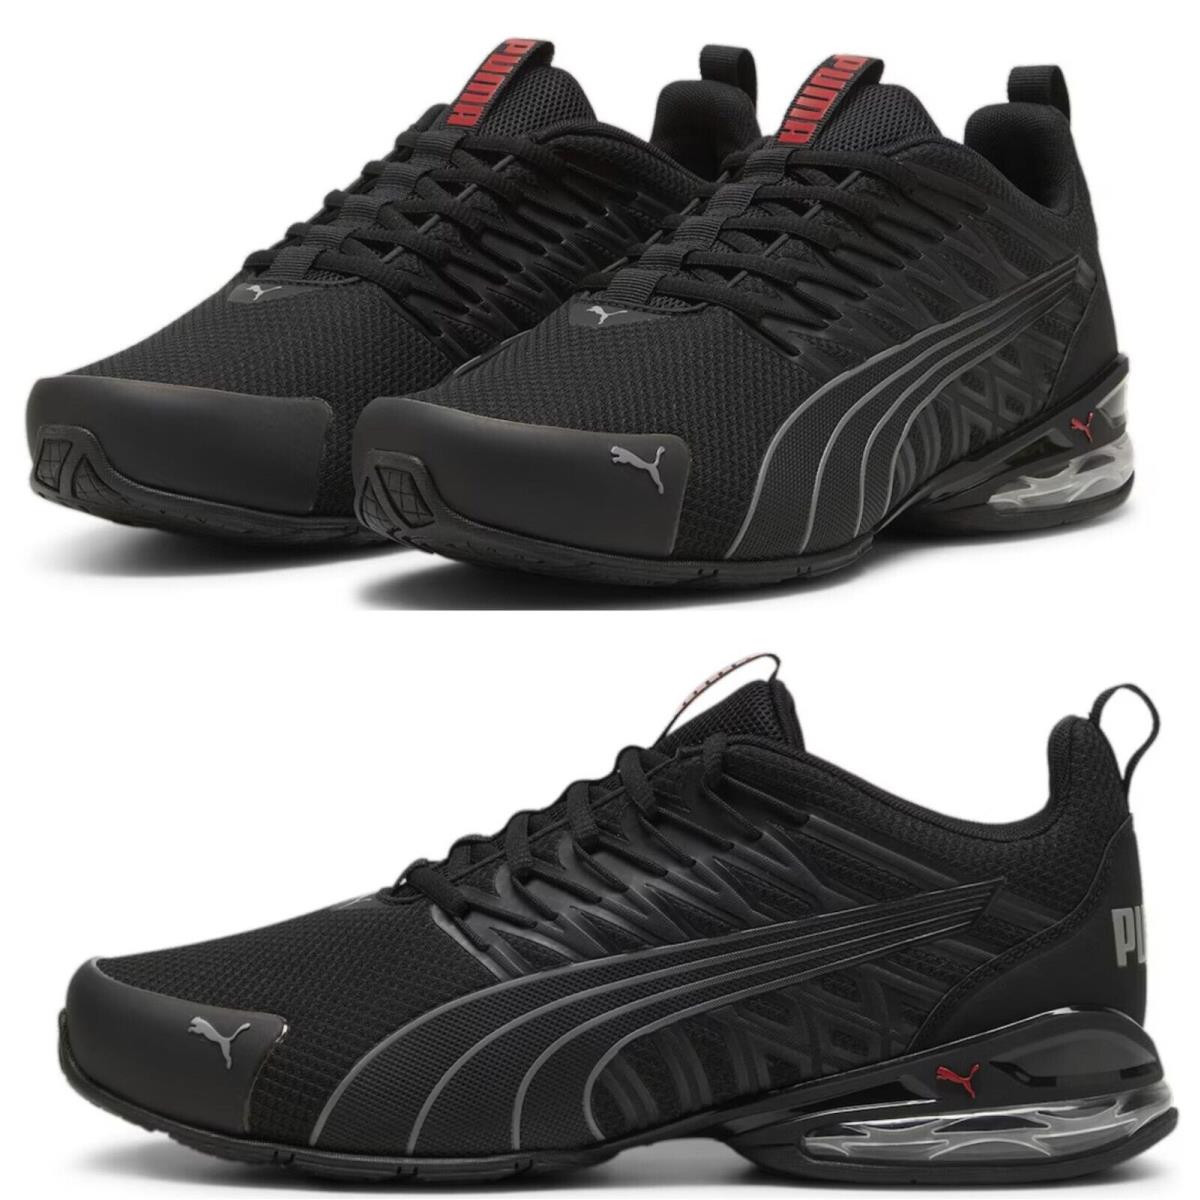 Puma Voltaic Casual Shoes Athletic Sneakers Mens Black Red All Sizes